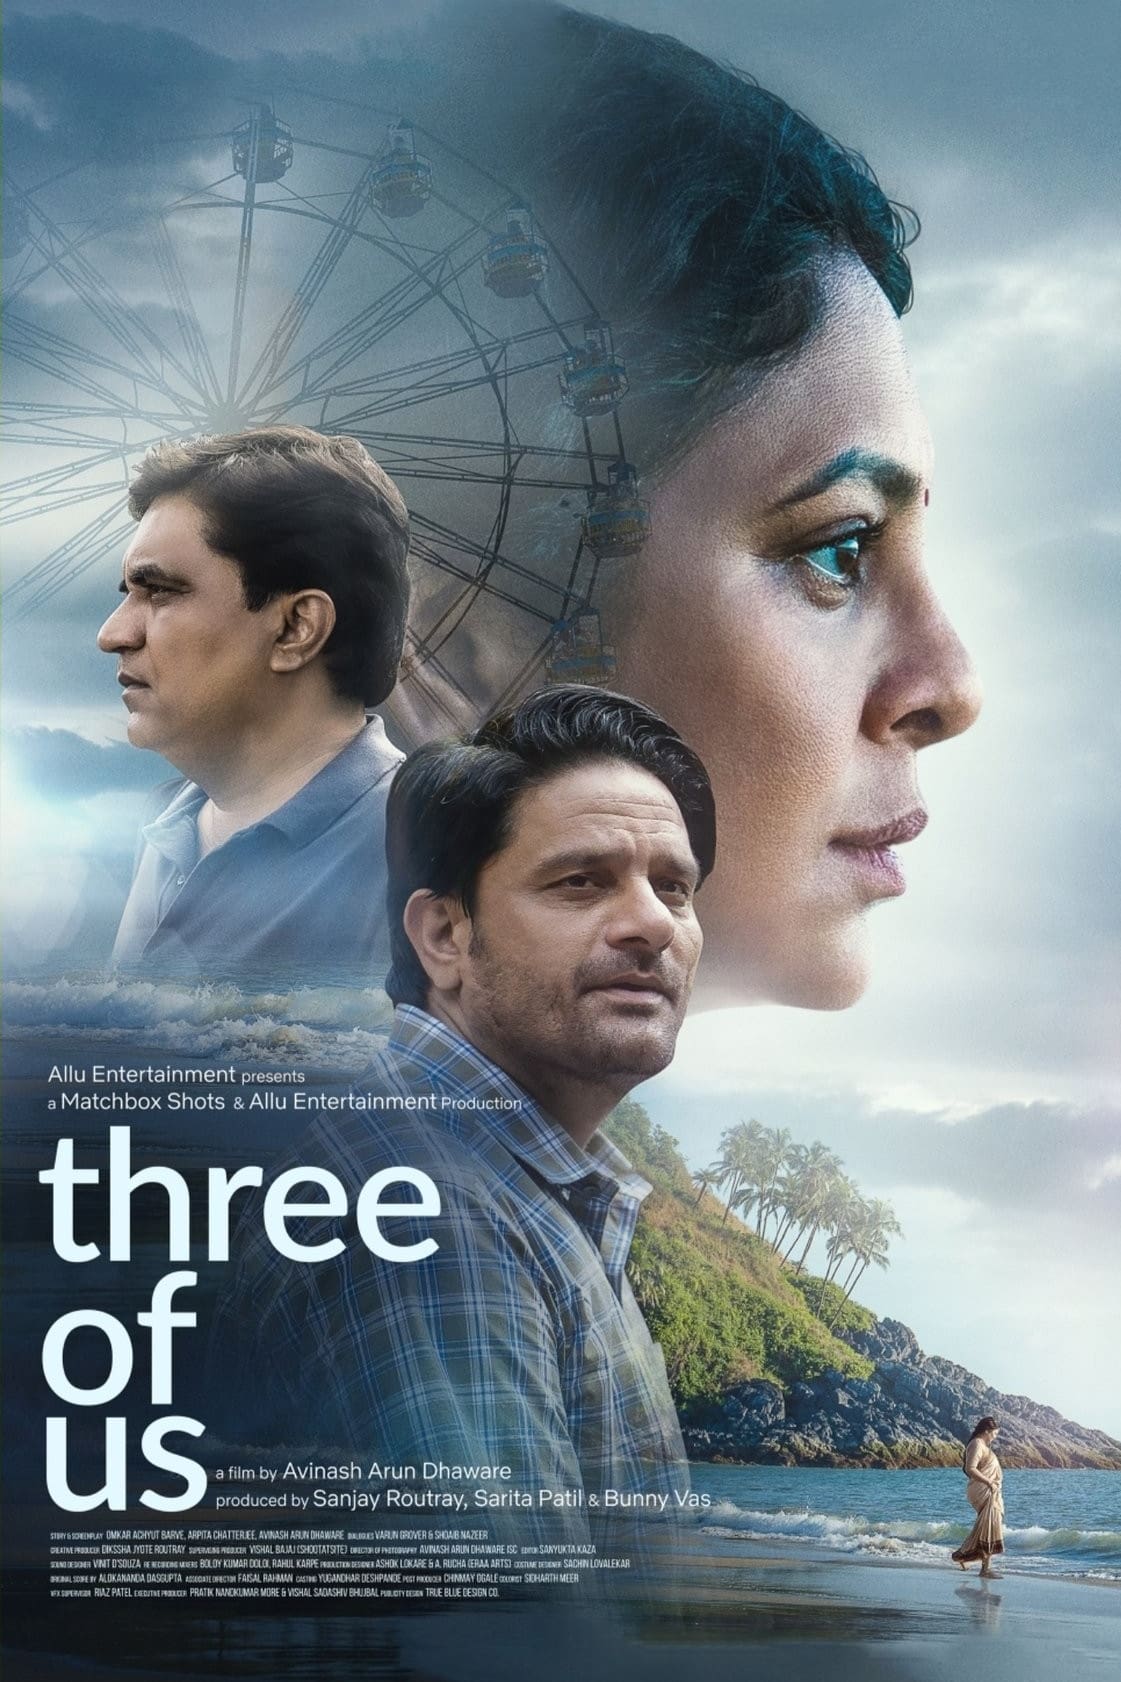 Poster for the movie "Three of Us"